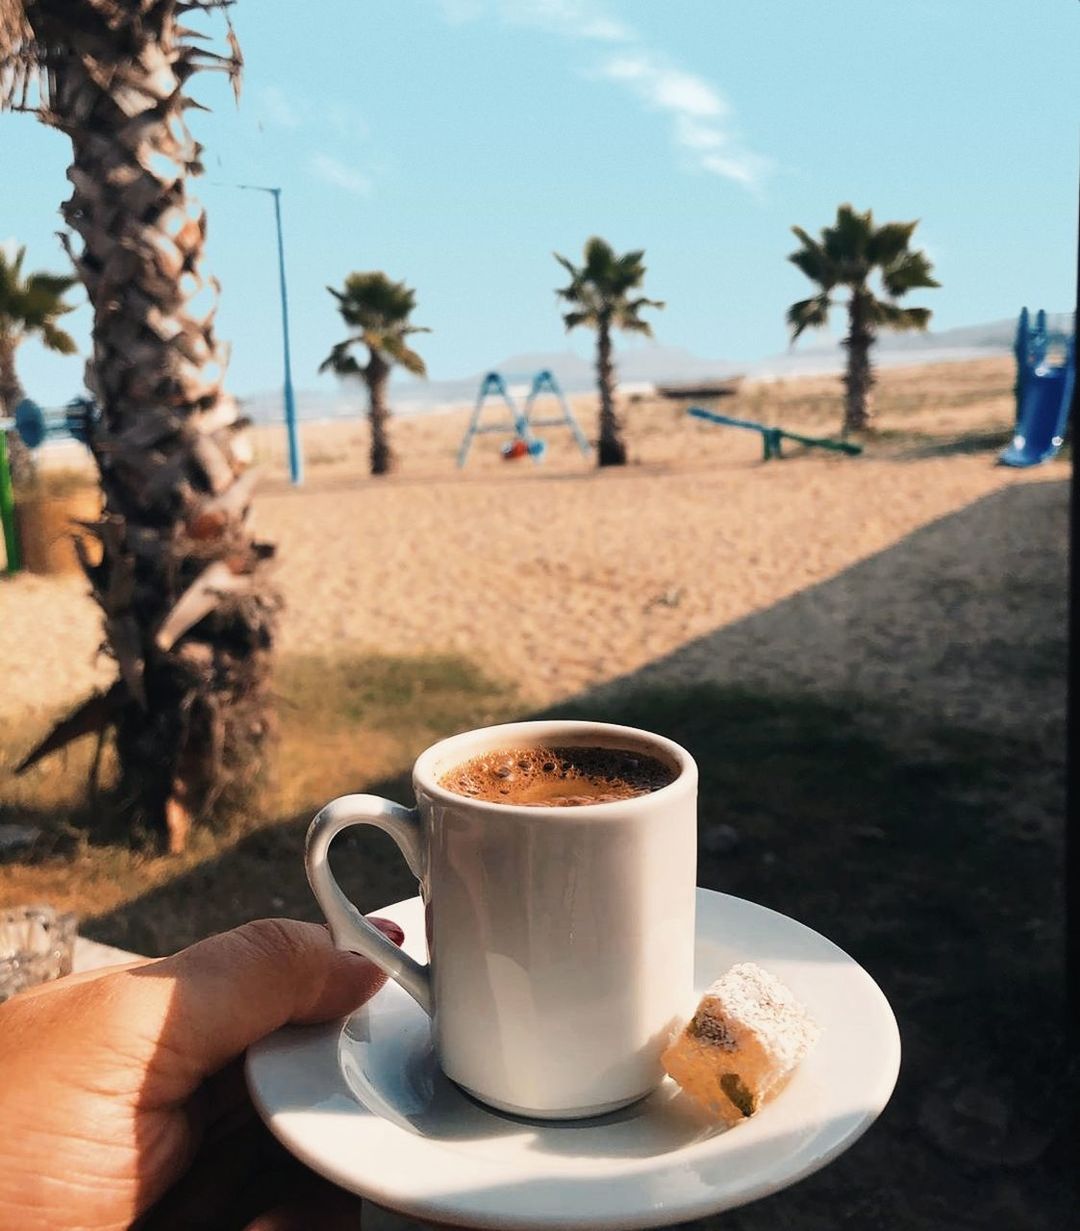 food and drink, drink, coffee, refreshment, cup, mug, coffee cup, tree, nature, palm tree, plant, saucer, food, crockery, hand, heat, day, sky, tropical climate, one person, table, sunlight, freshness, hot drink, outdoors, beach, land, water, leisure activity, focus on foreground, lifestyles, relaxation